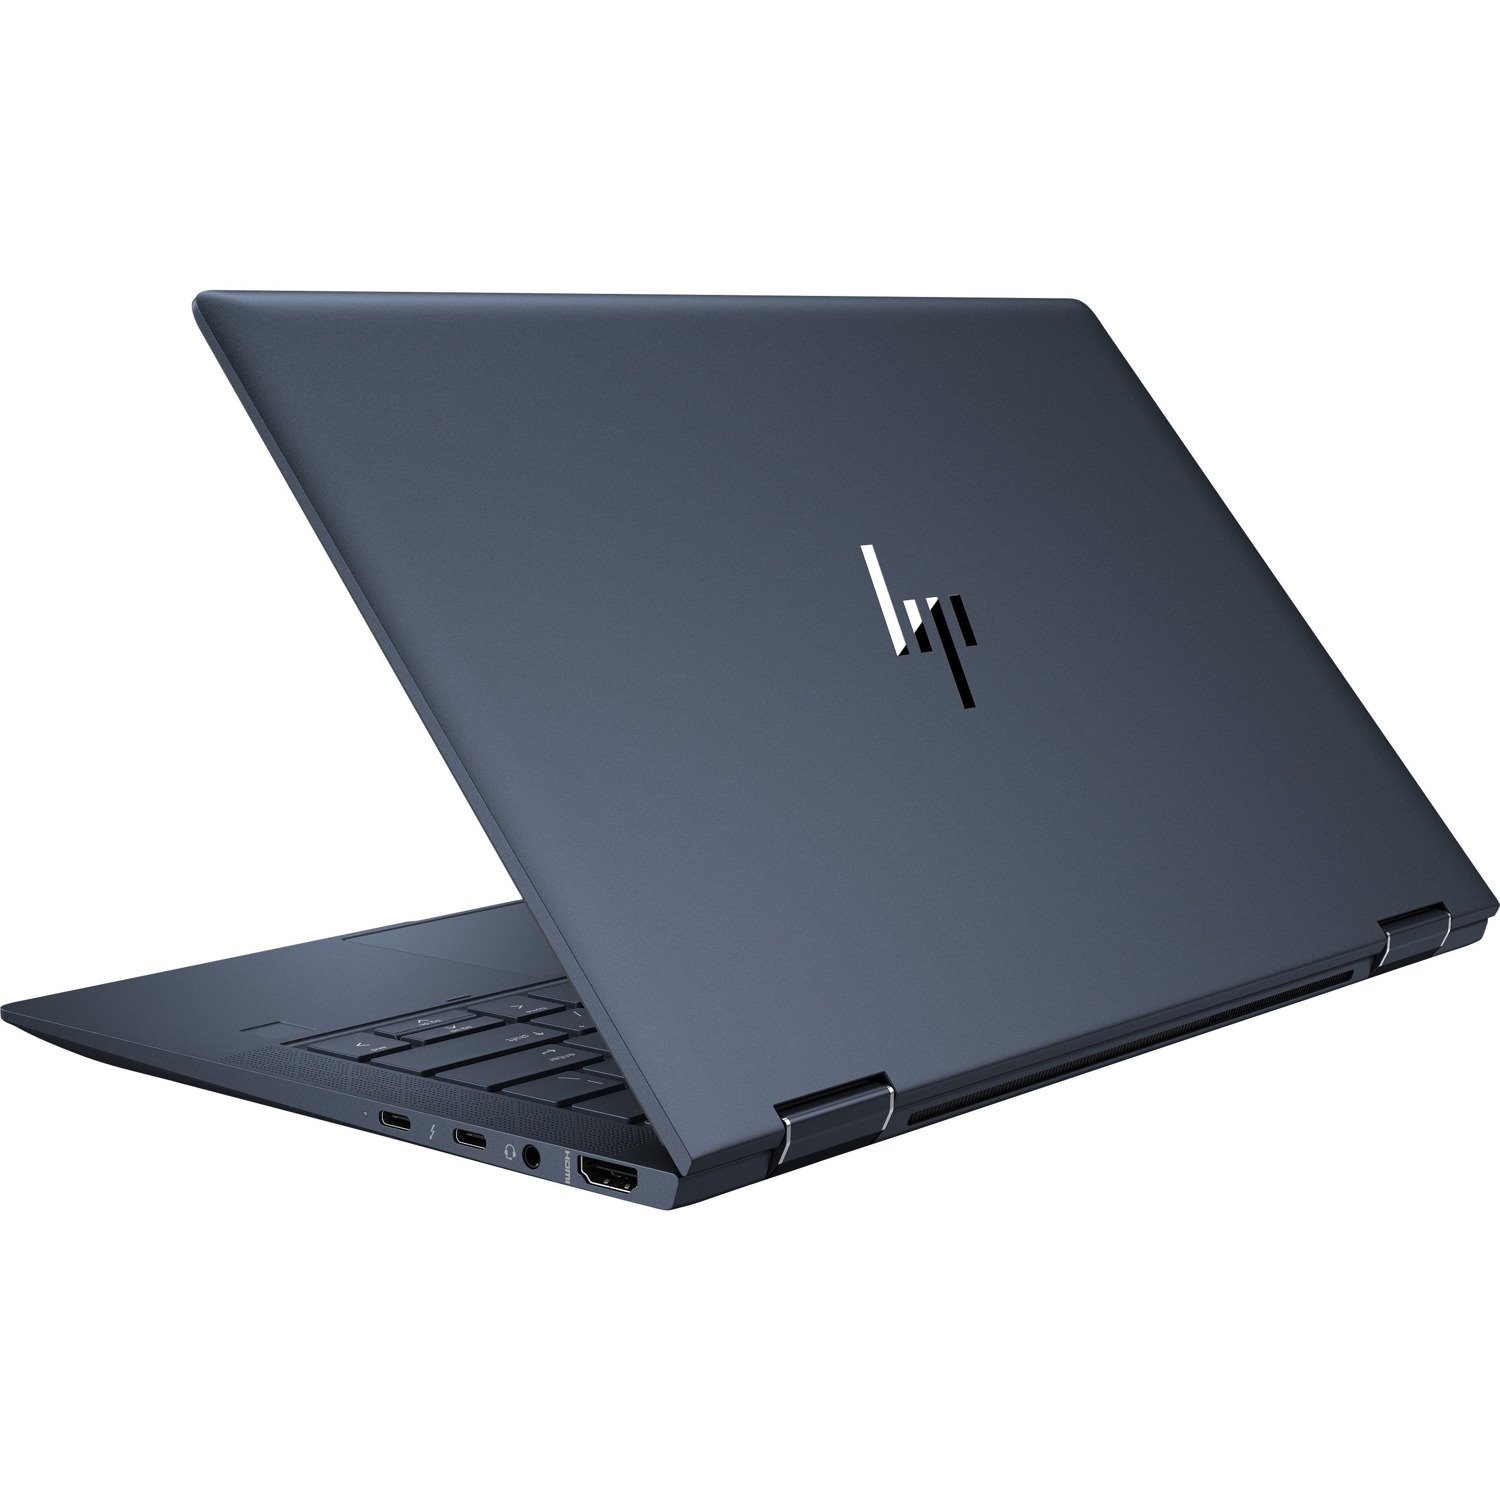 HP Elite Dragonfly G2 LTE Advanced 13.3" Touchscreen Convertible 2 in 1 Notebook - Full HD - 1920 x 1080 - Intel Core i7 11th Gen i7-1165G7 Quad-core (4 Core) 2.80 GHz - 16 GB Total RAM - 512 GB SSD